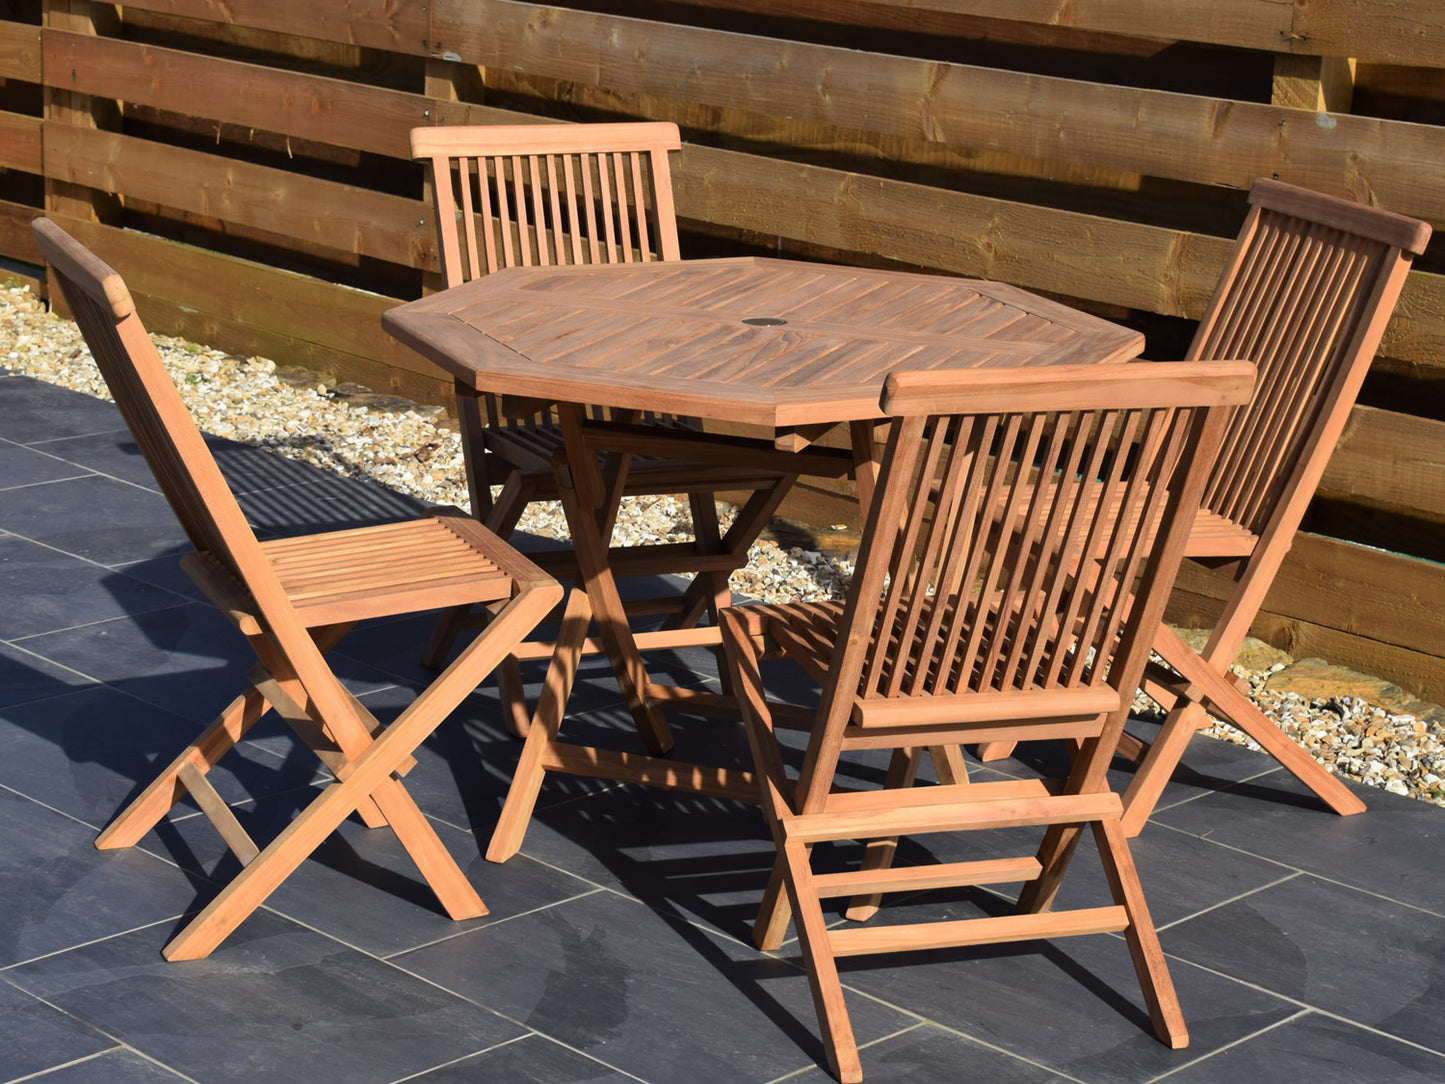 4 Seater Octagonal Folding Teak Set with Classic Folding Chairs